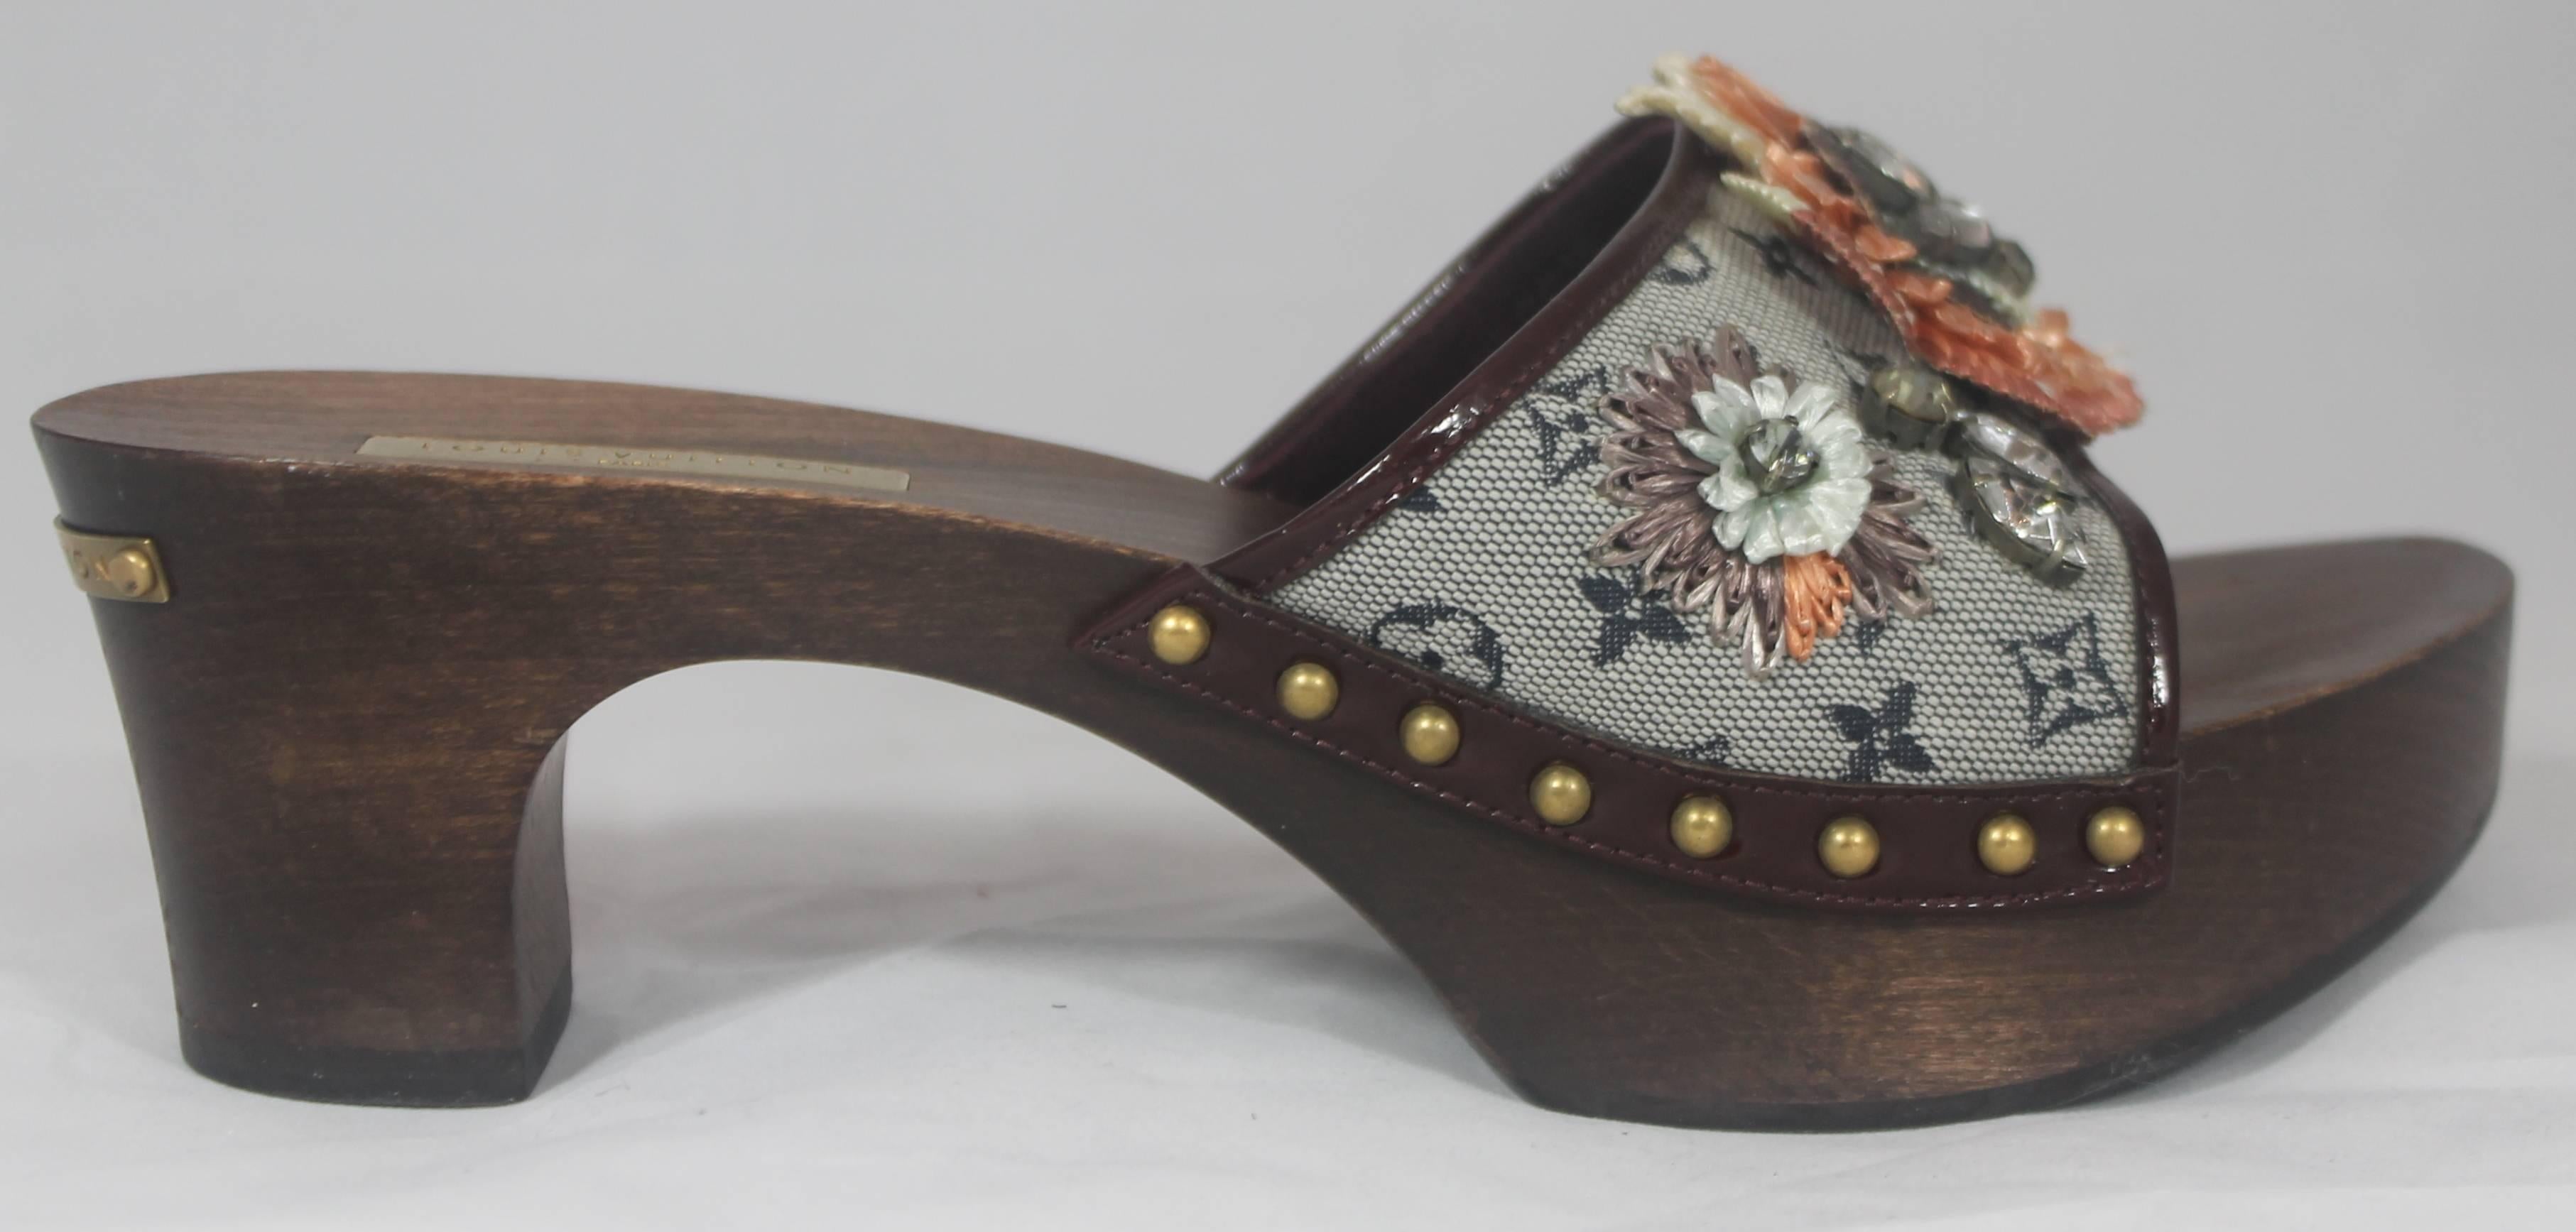 Louis Vuitton Grey Monogram Clog w/  Rhinestone and Floral Raffia Decor - 37. These unique clogs have a wooden look to them. On the back of the heel is a gold metal piece that says 